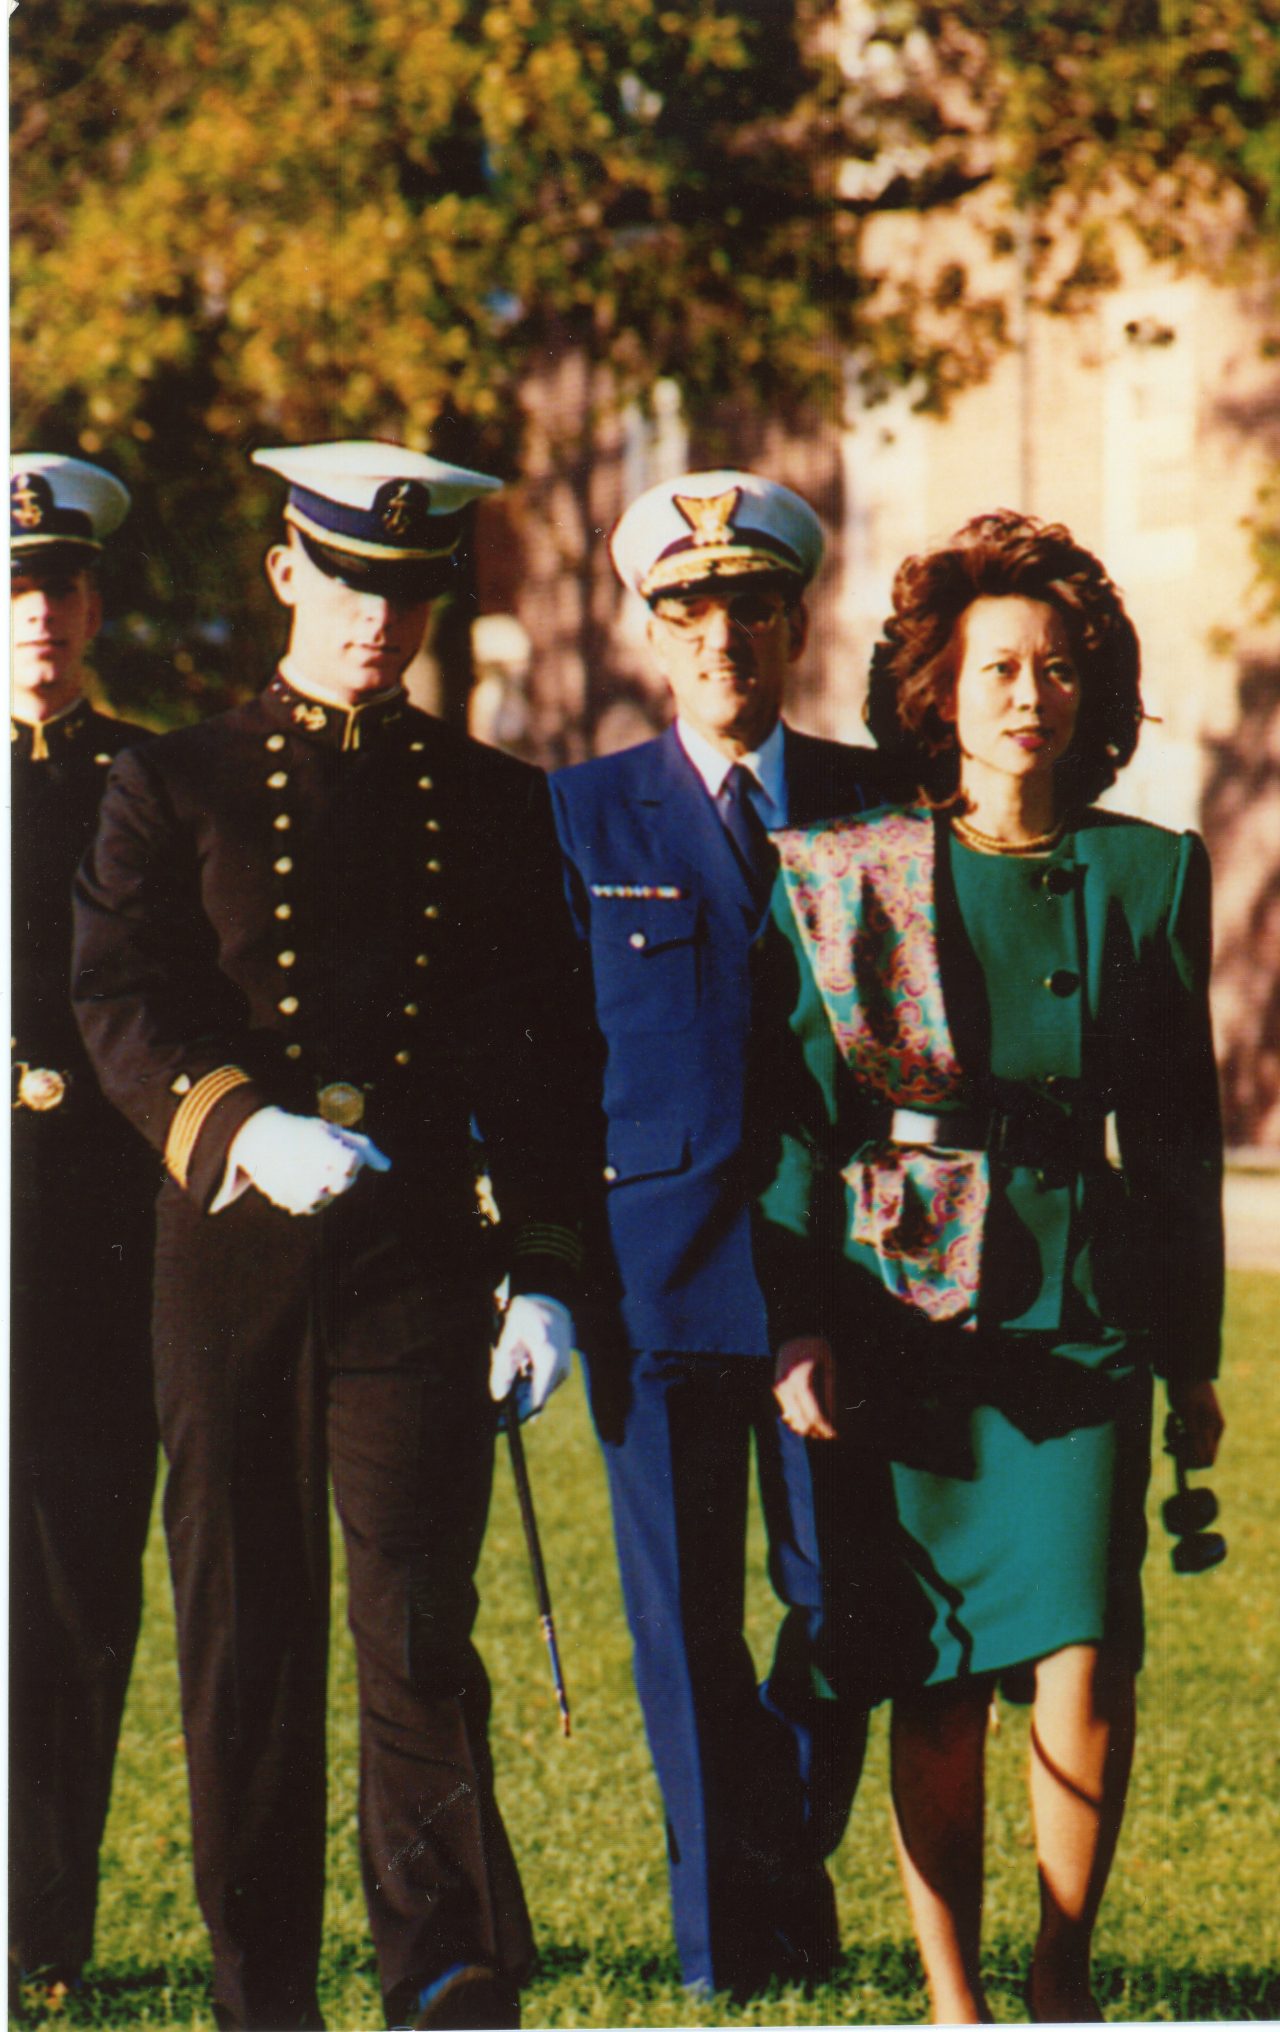 U.S. Deputy Secretary of Transportation Elaine Chao reviewing the troops at Coast Guard Academy, Groton, CT.